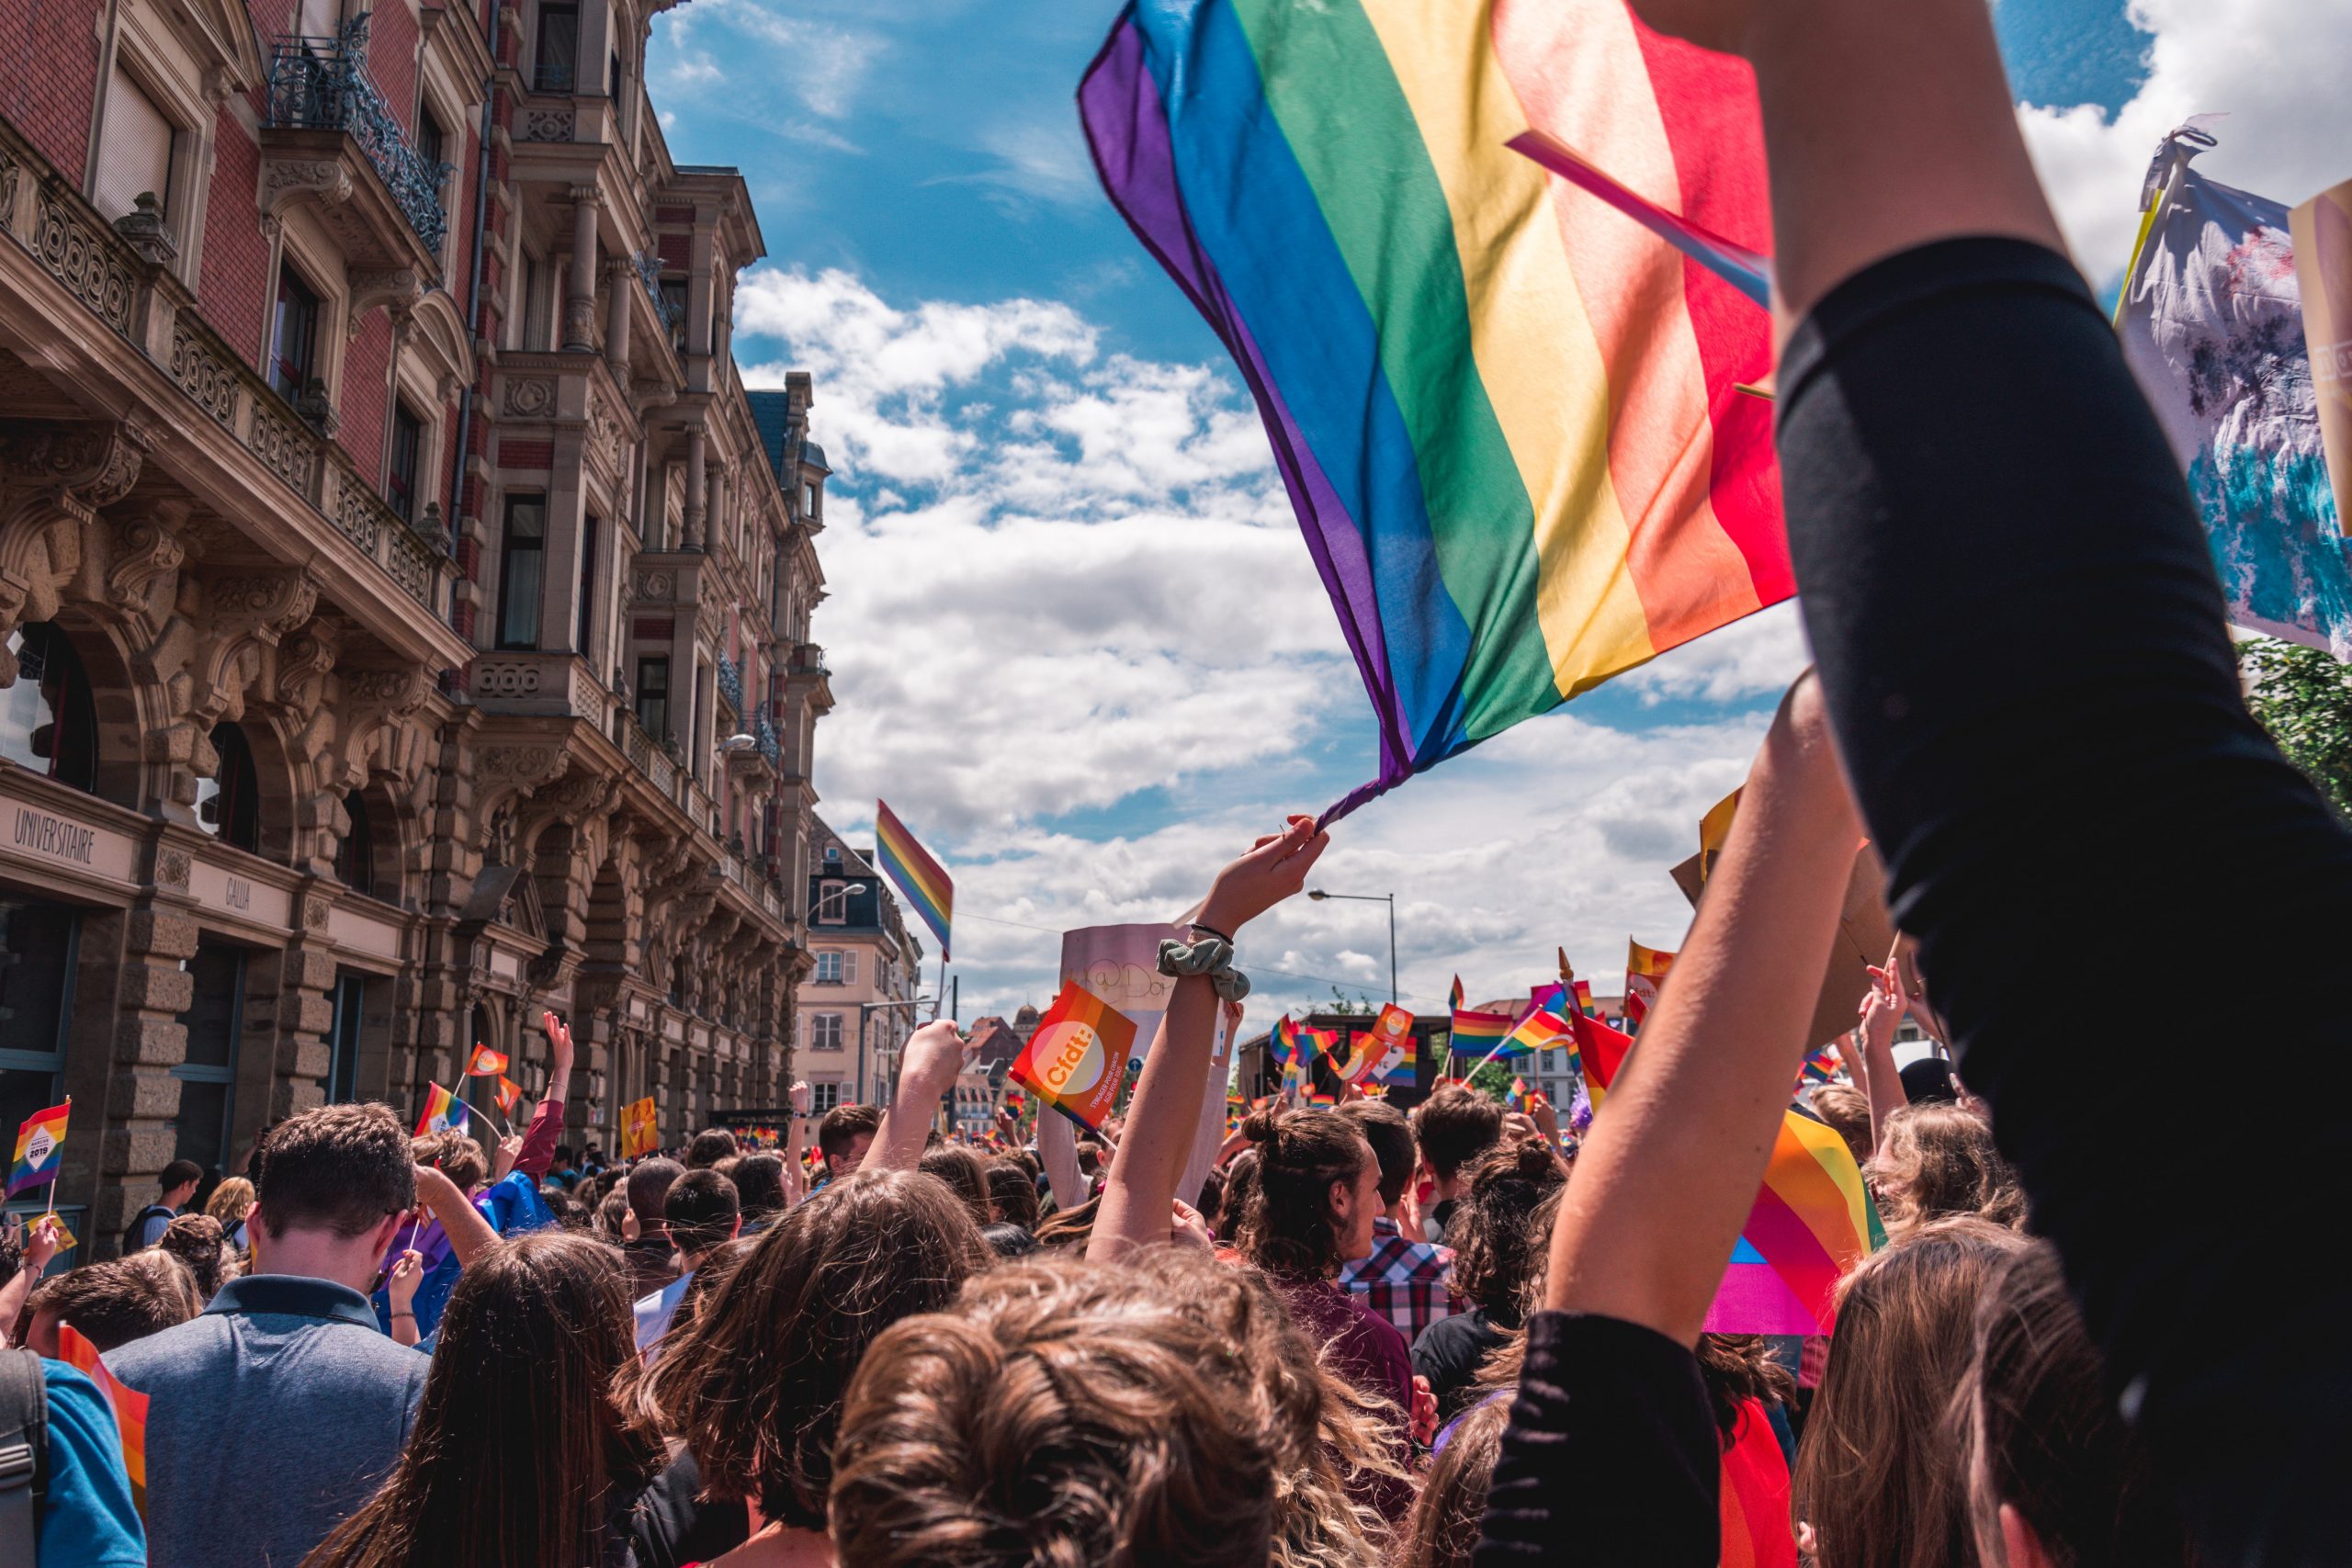 This image shows a march of LGBTQ+ pride.